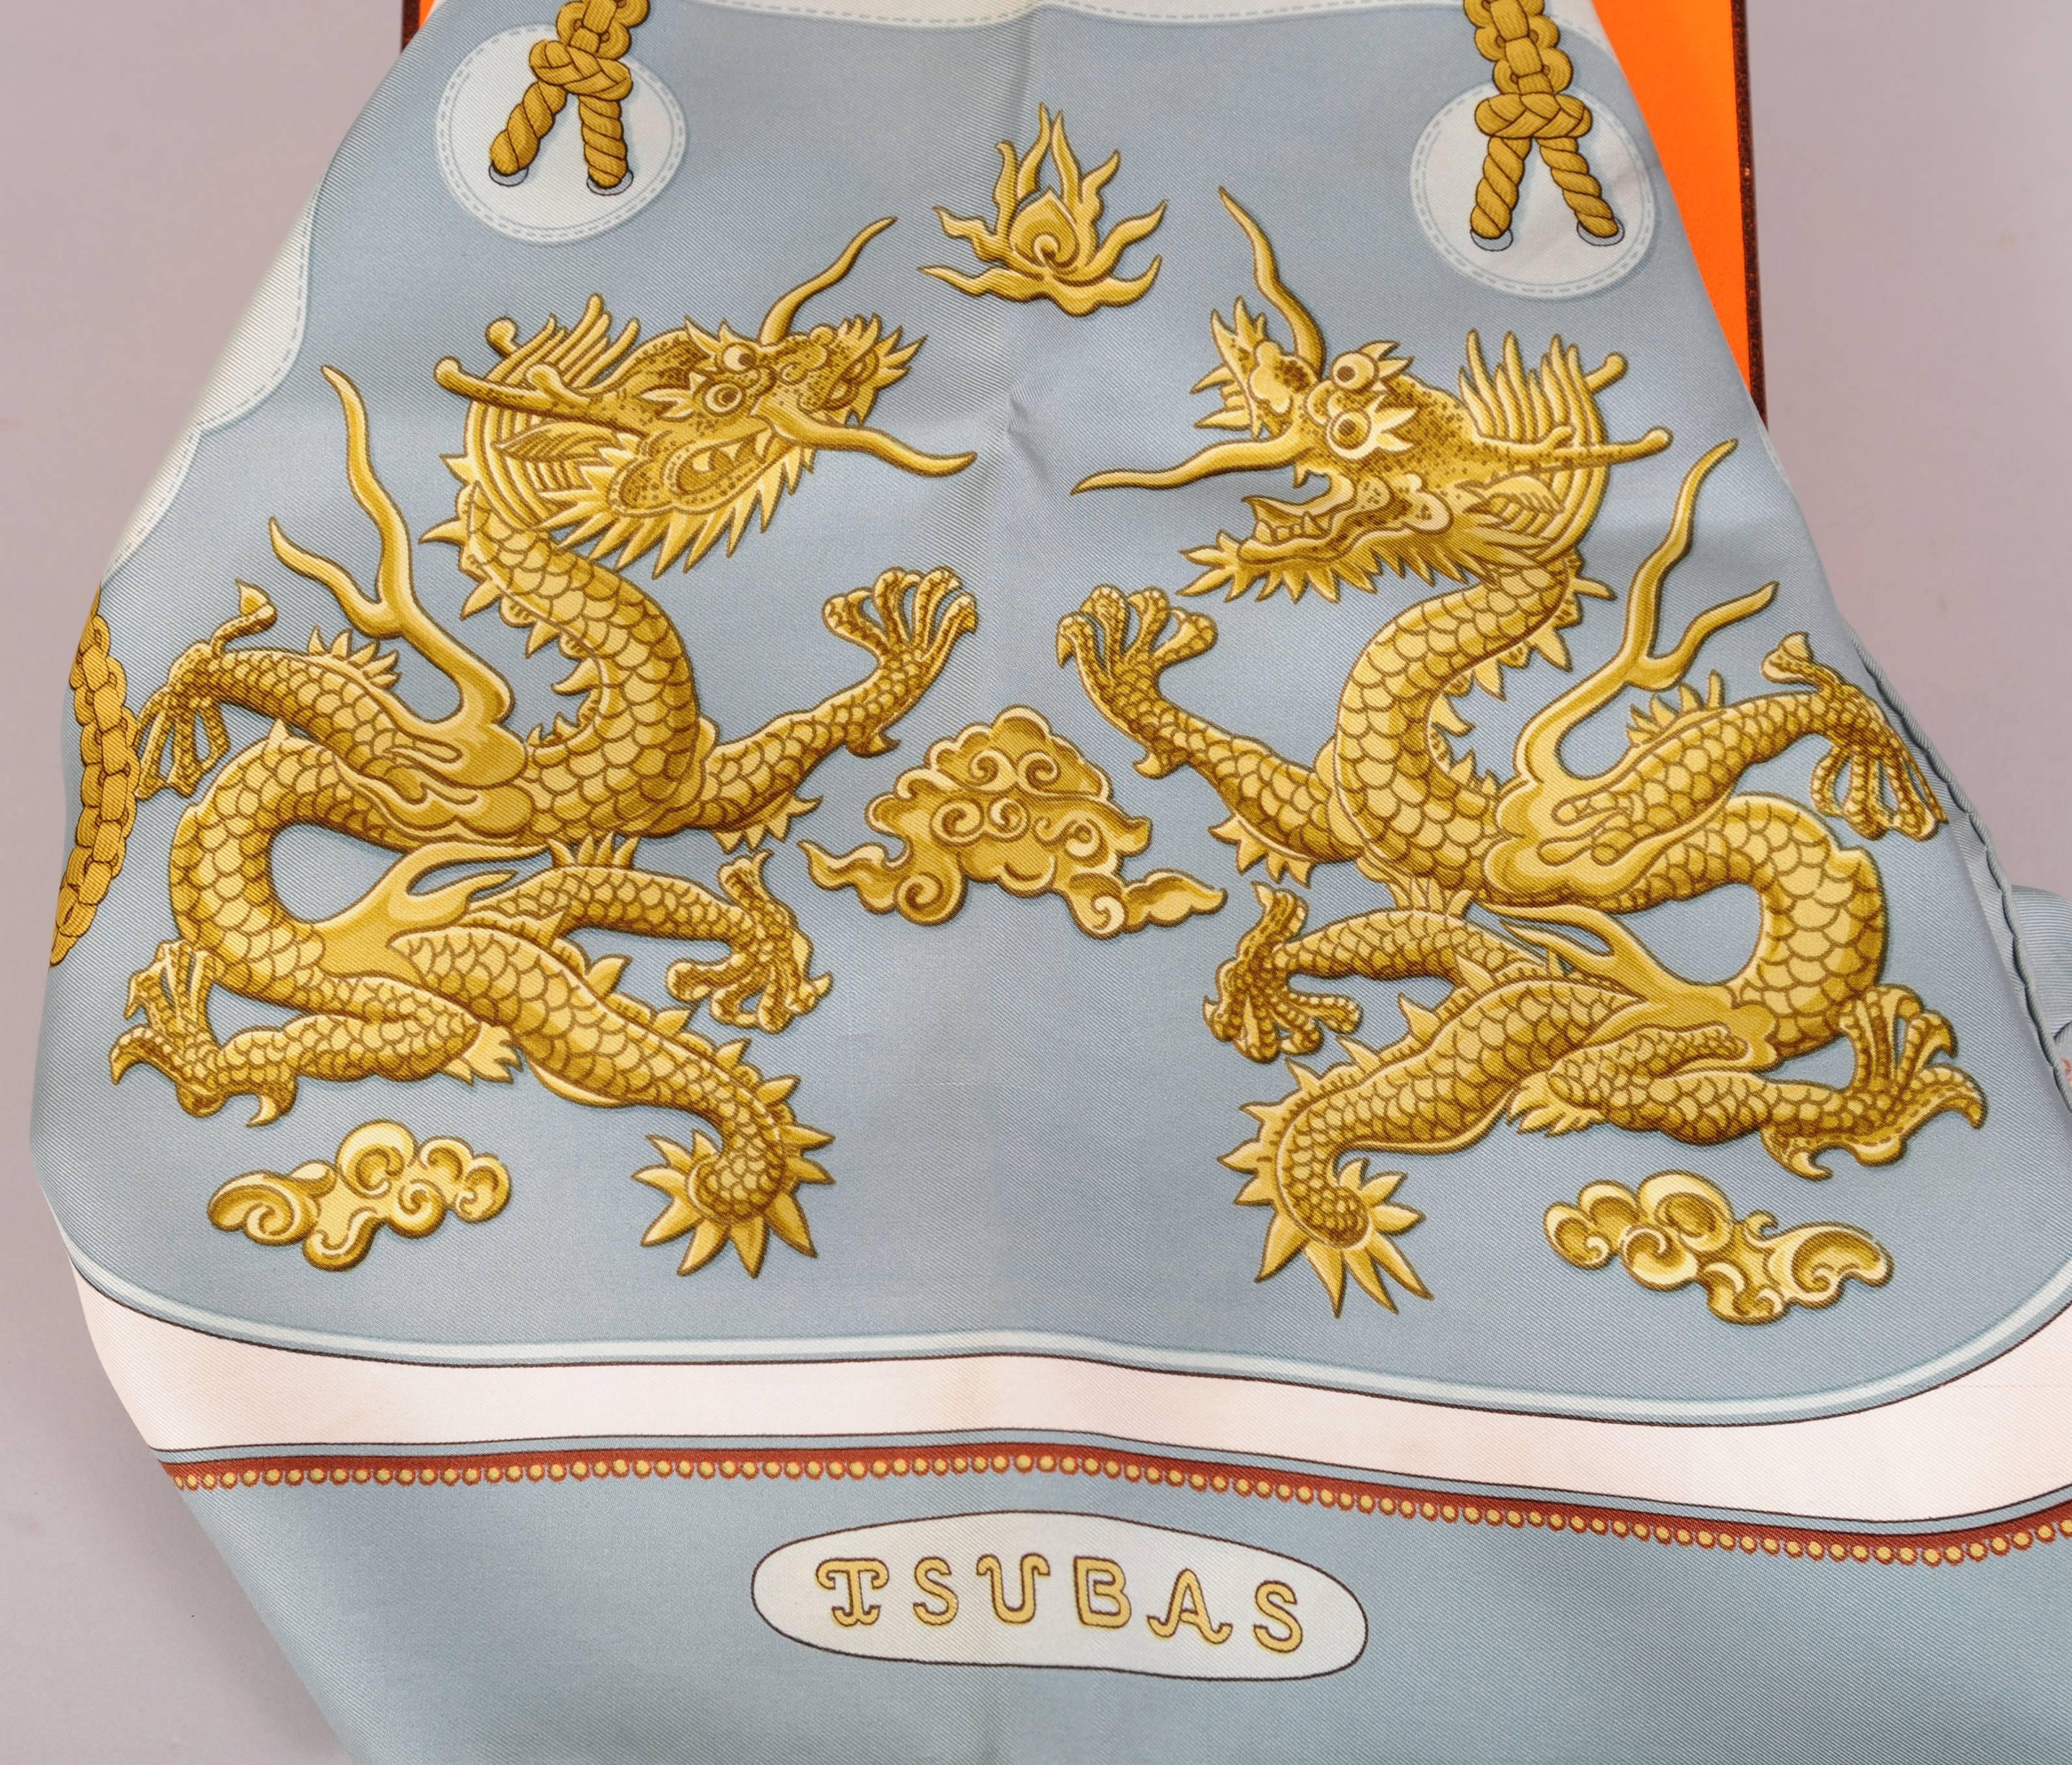 Christiane Vauzelles is the designer of this beautiful scarf depicting Tsubas, the hand guards or protective handle on a Japanese sword, which are typically enhanced with inlay or carving. This scarf is in shades of blue with gold on a white